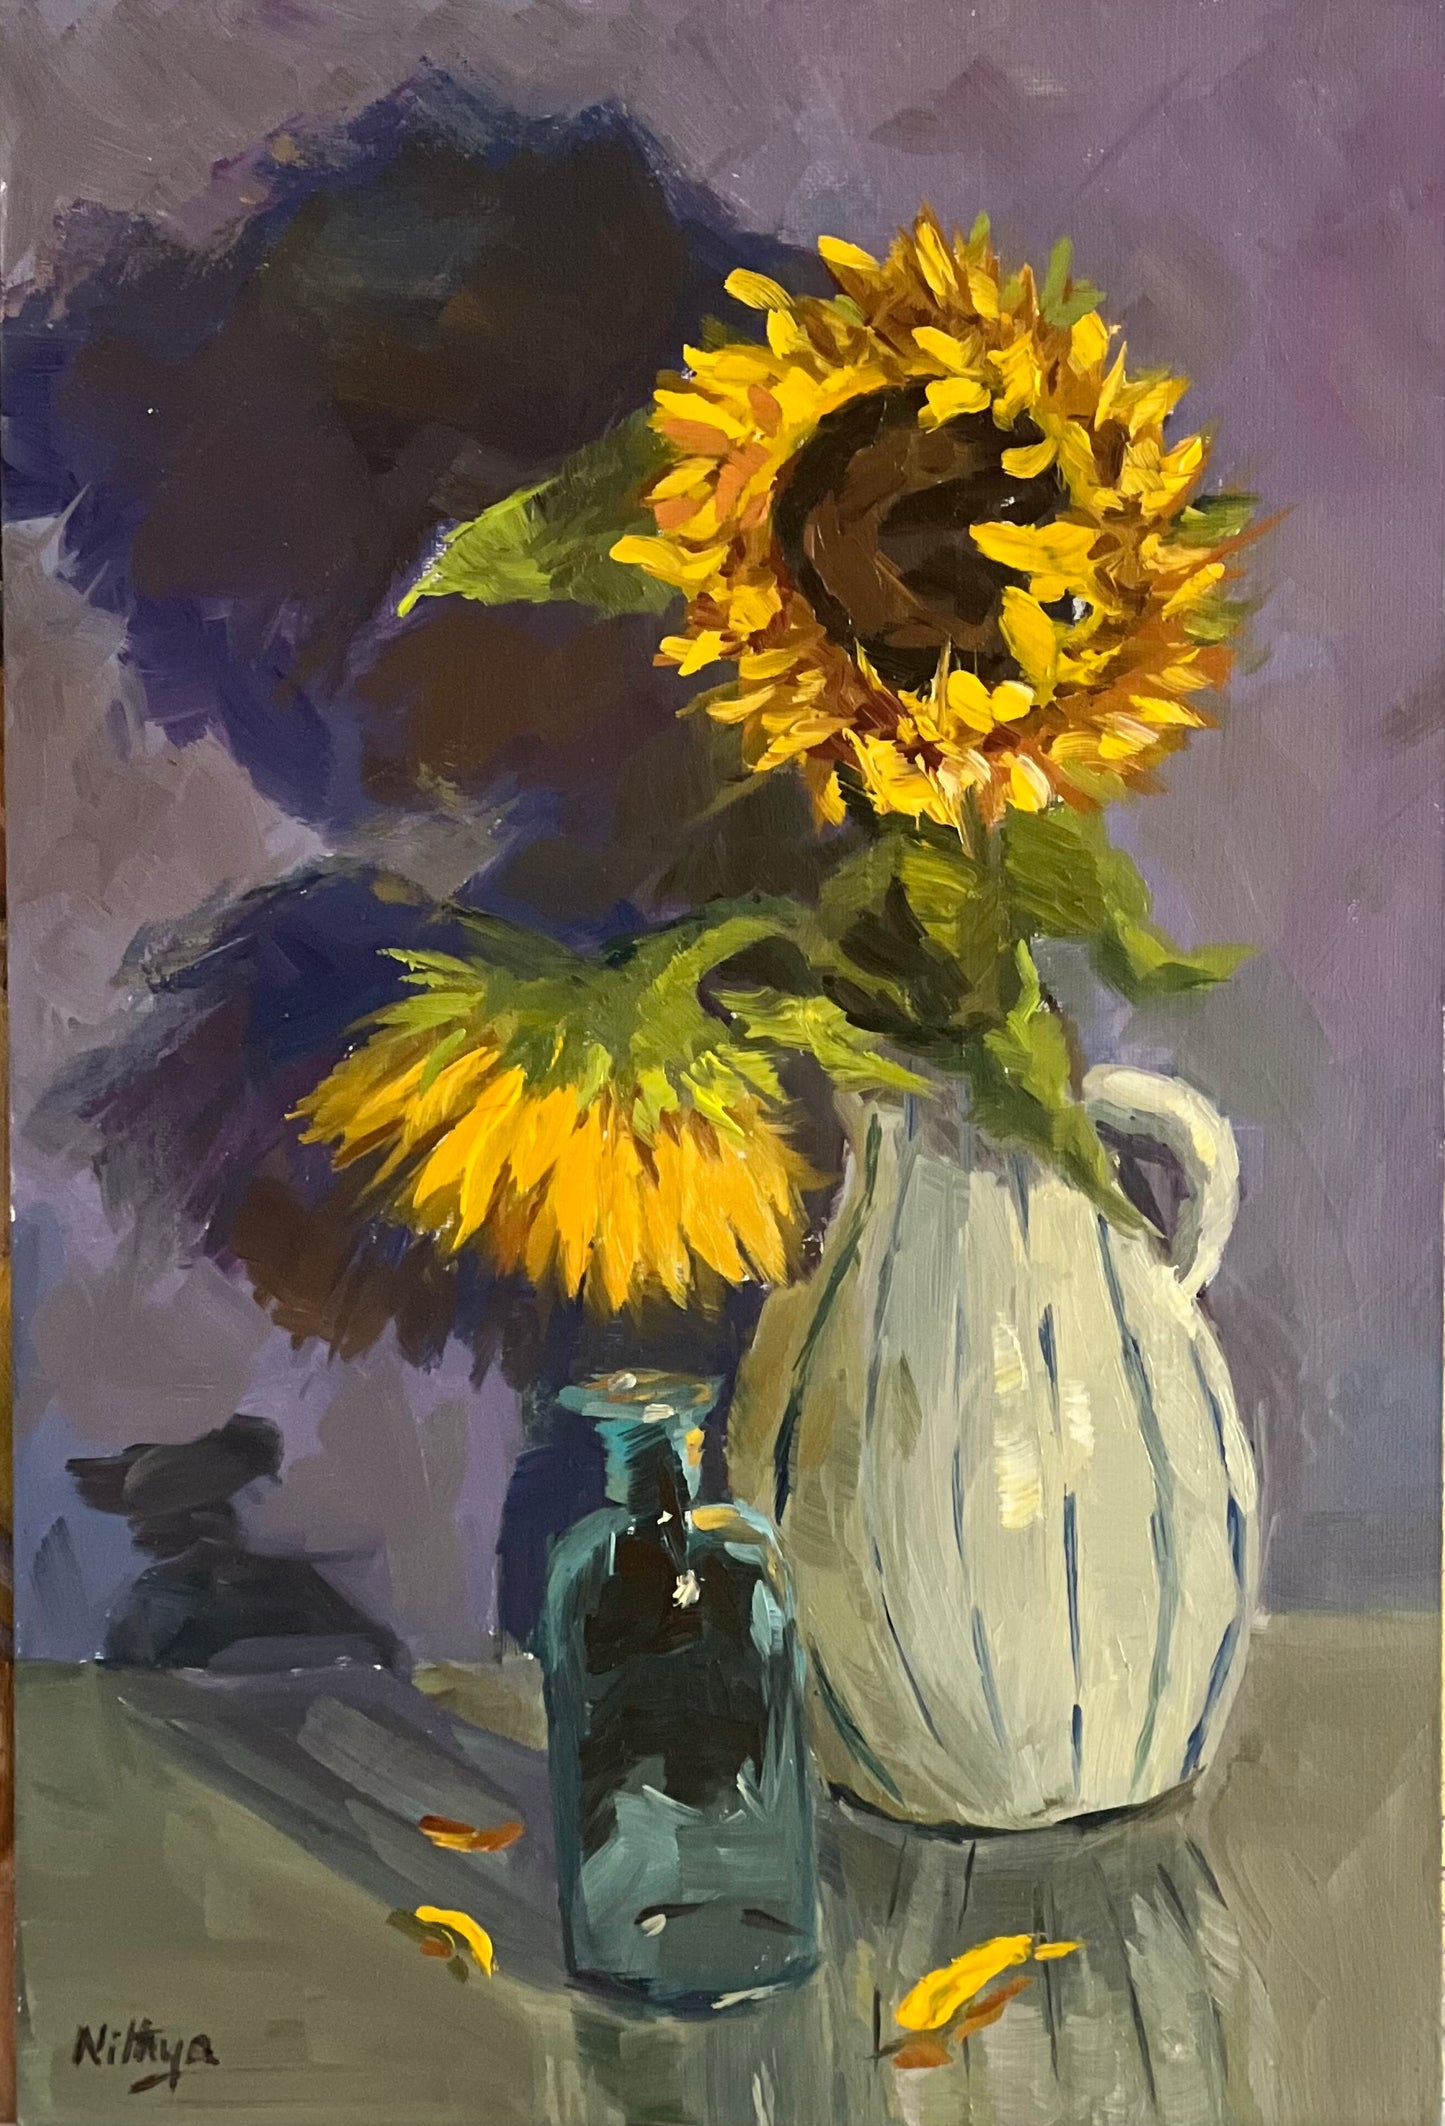 Sunflower Series 9 - Original Stilllife Painting, 8 by 12 inches